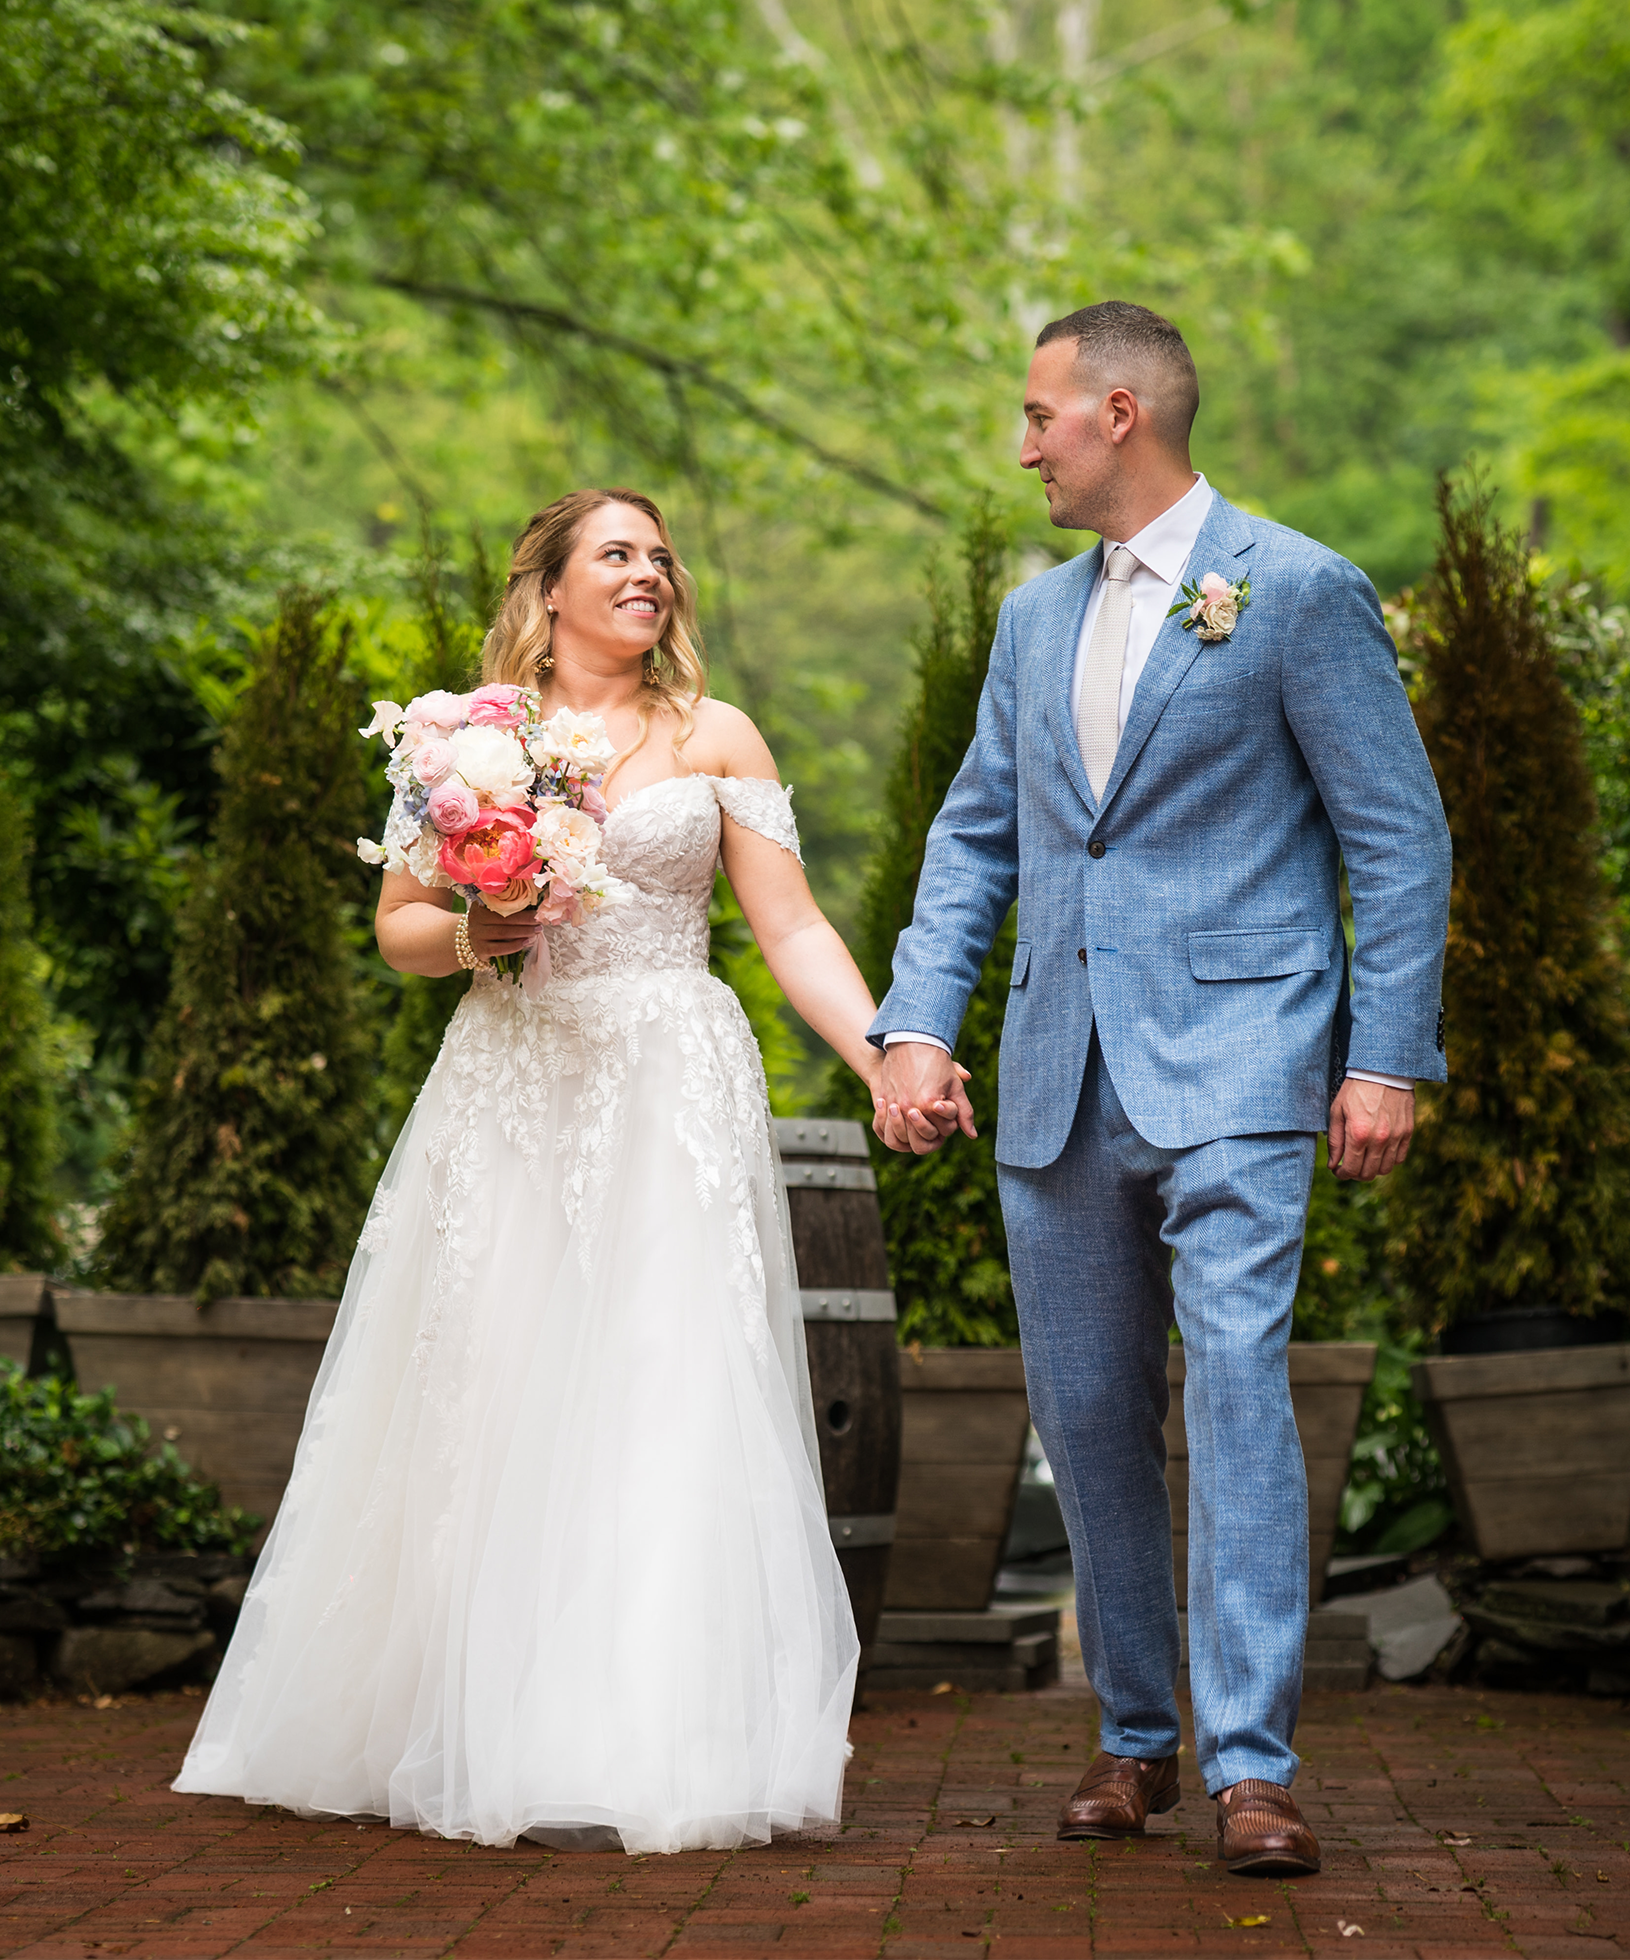 Bride with colorful bouquet holding hands with groom in light blue suit outside.